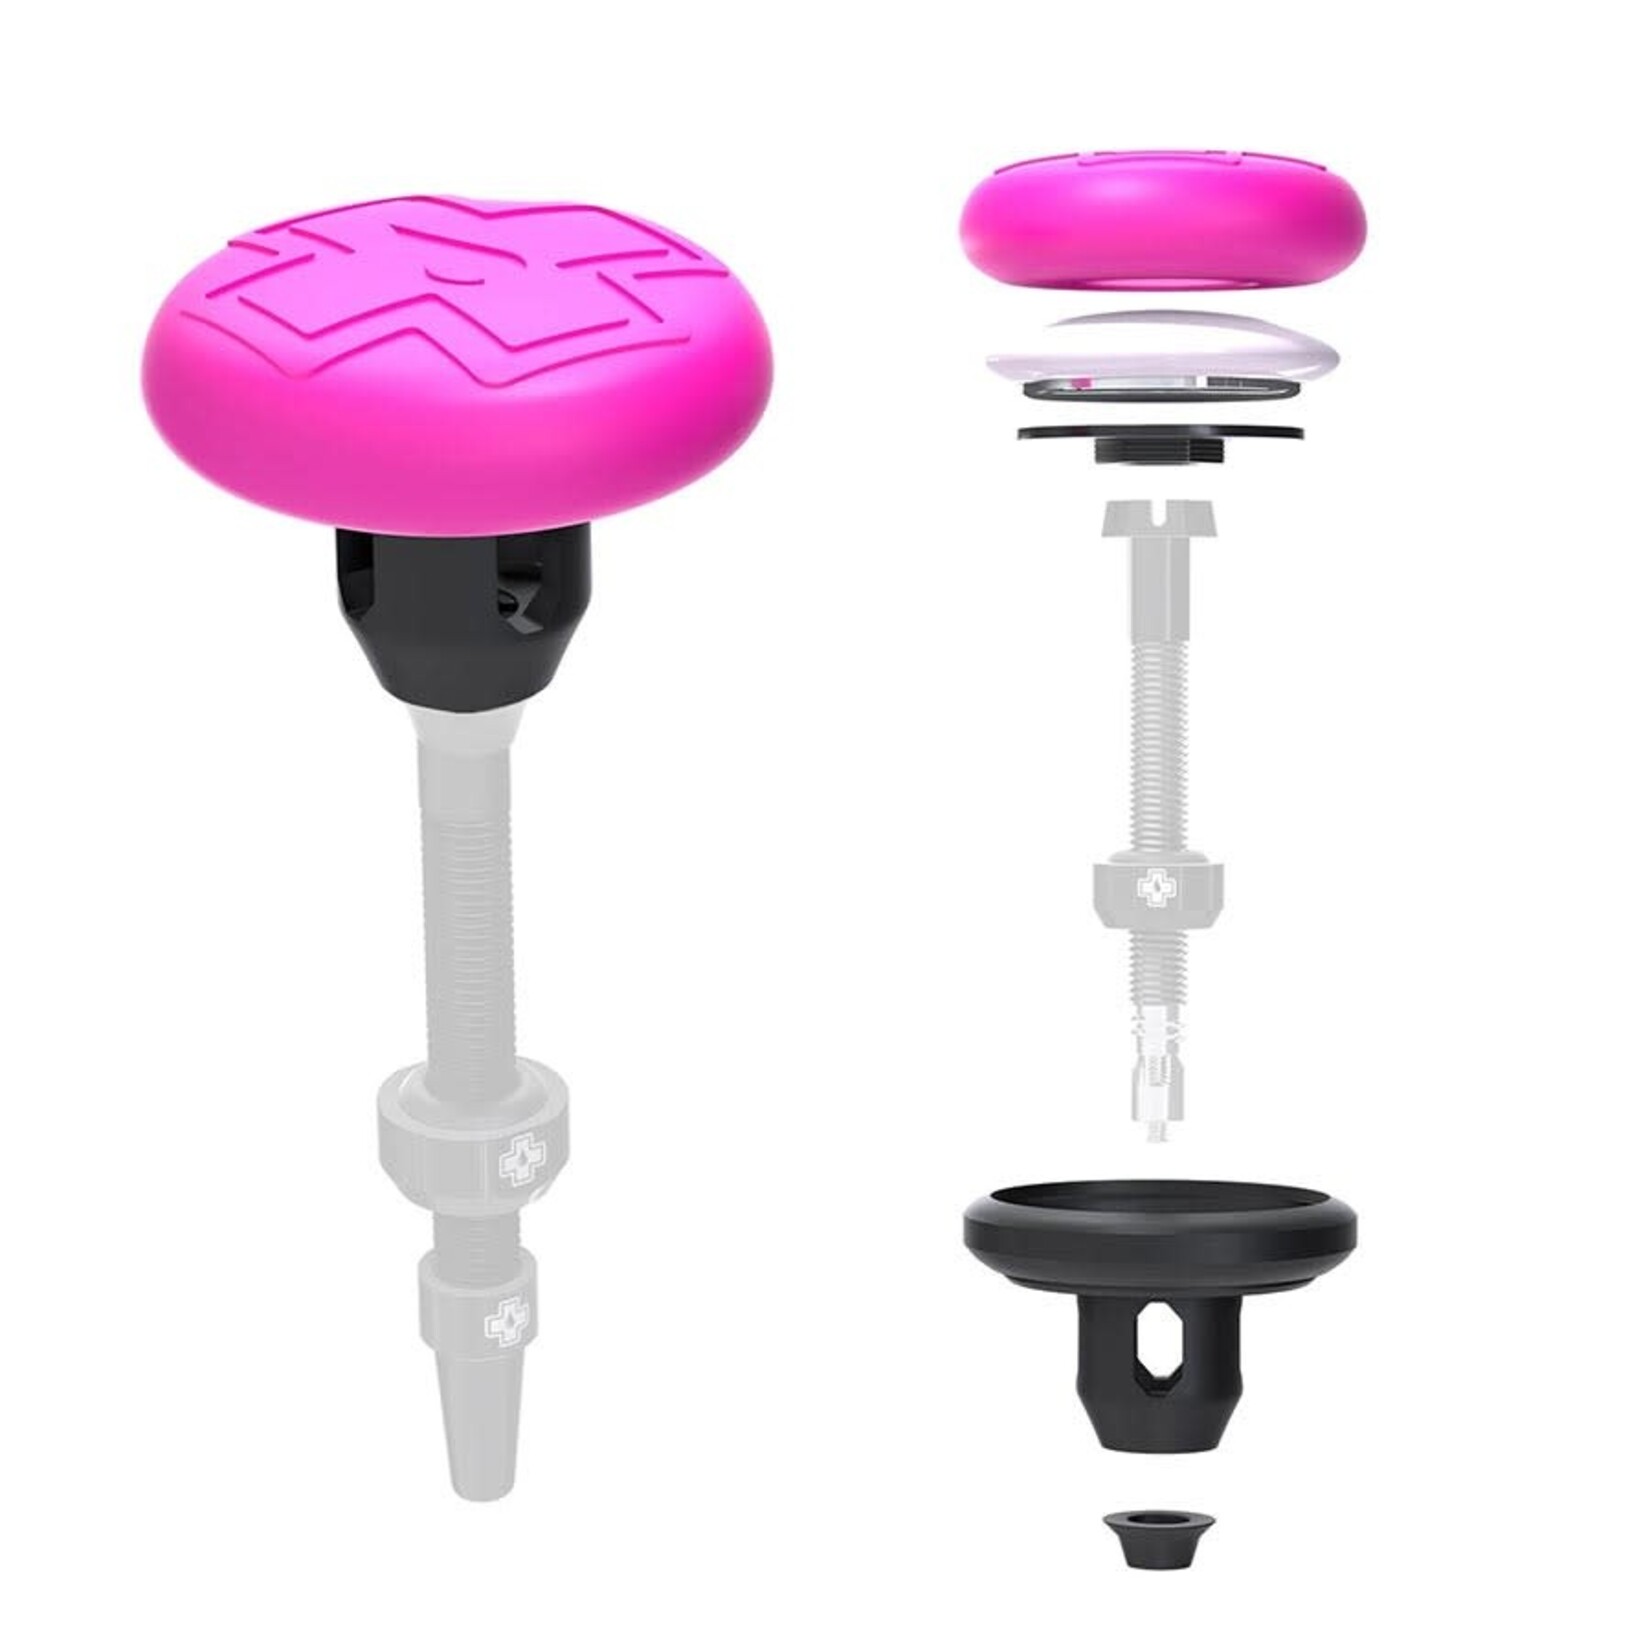 Muc-Off Muc-Off, Tubeless Tag Holder, Black/Pink